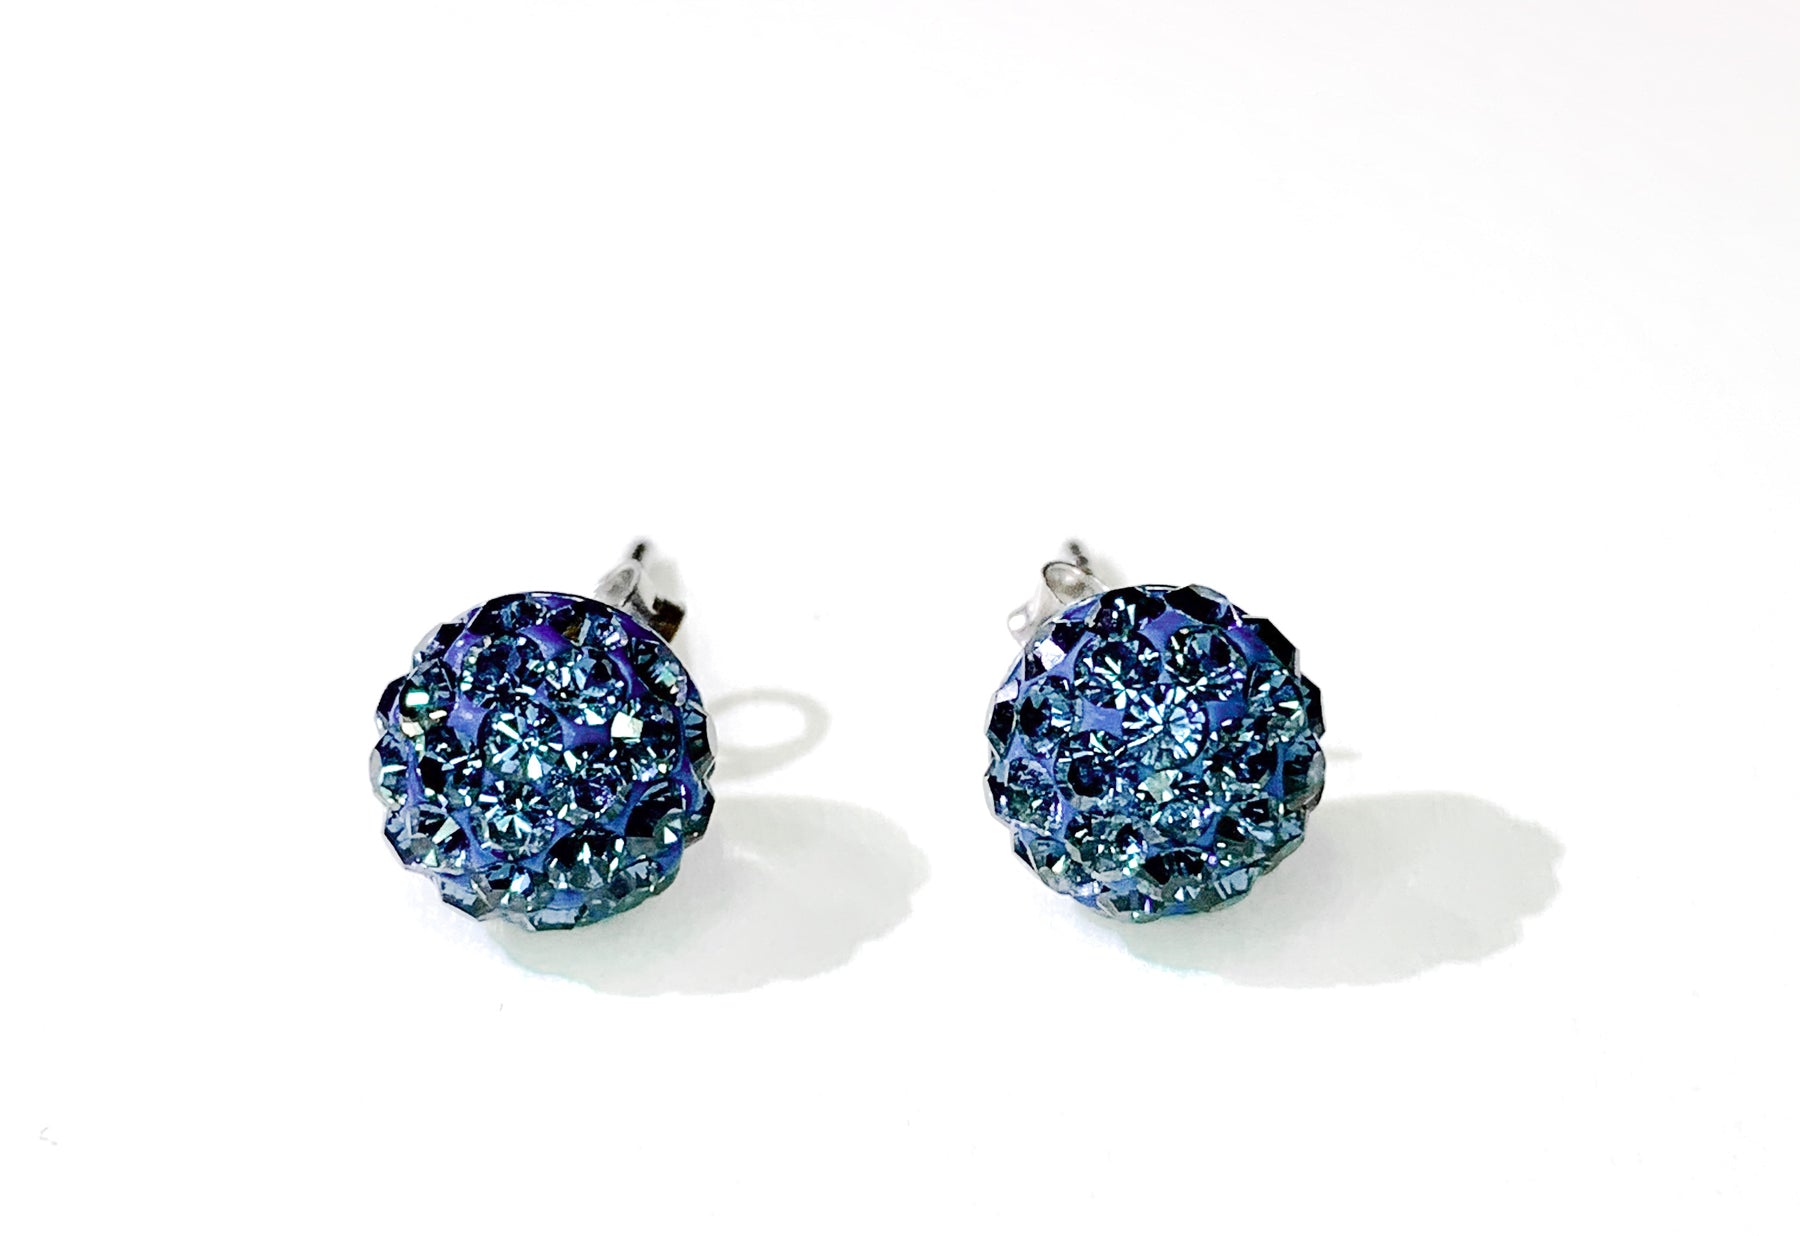 Earrings made of 925 silver, clear Swarovski crystal, sparkly ball on stick  | Jewelry Eshop